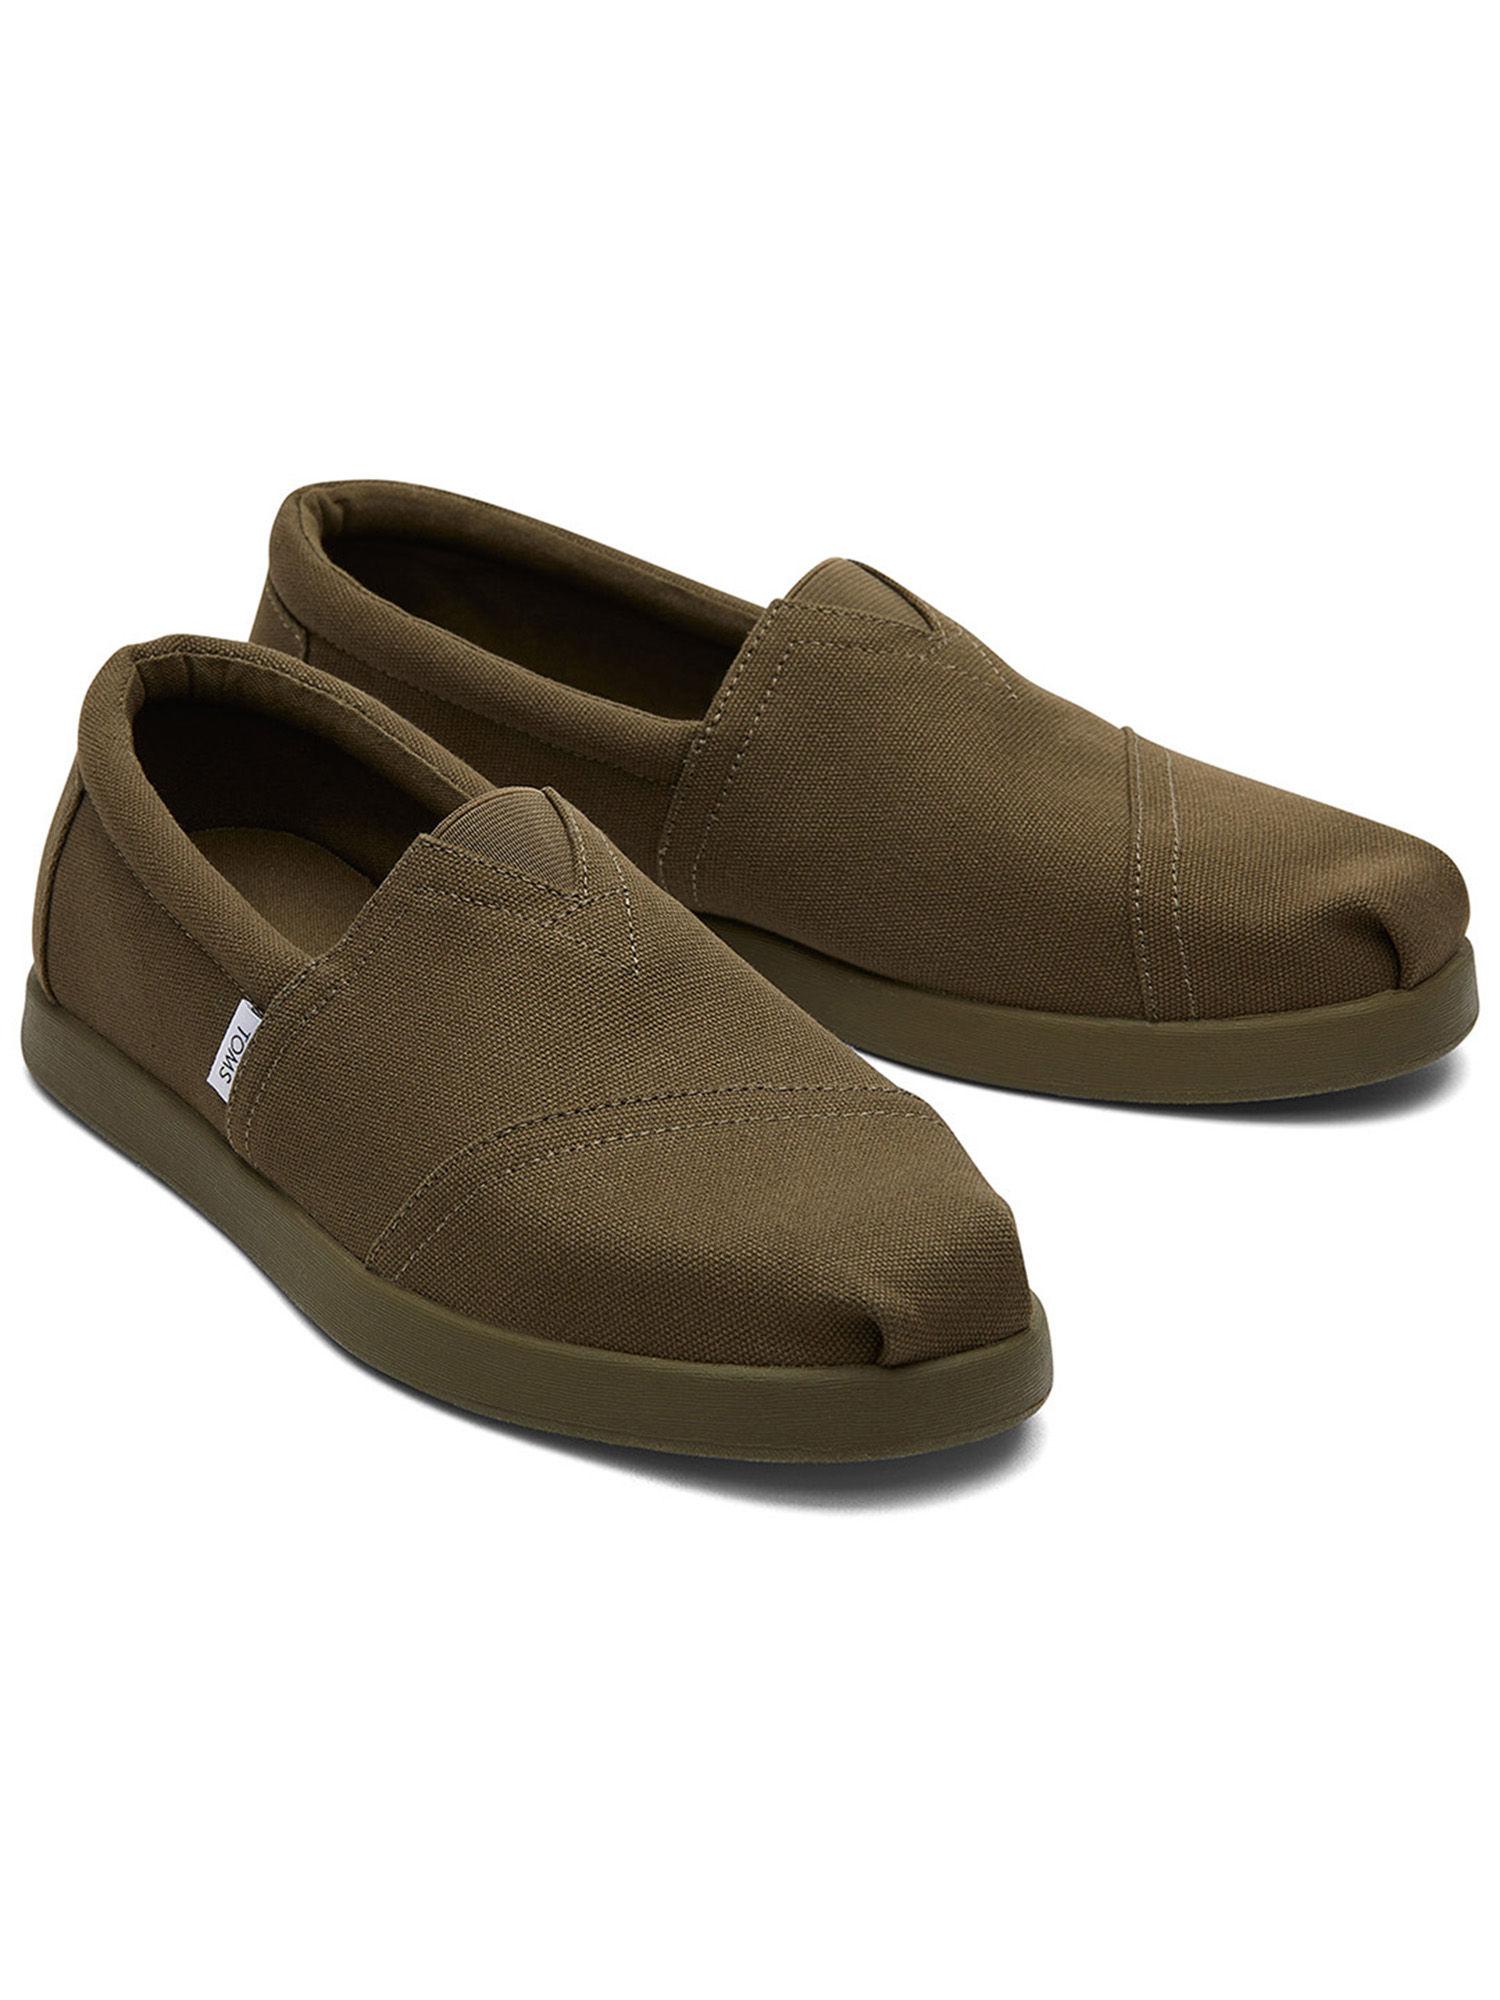 alp fwd wide width earthwise casual shoes